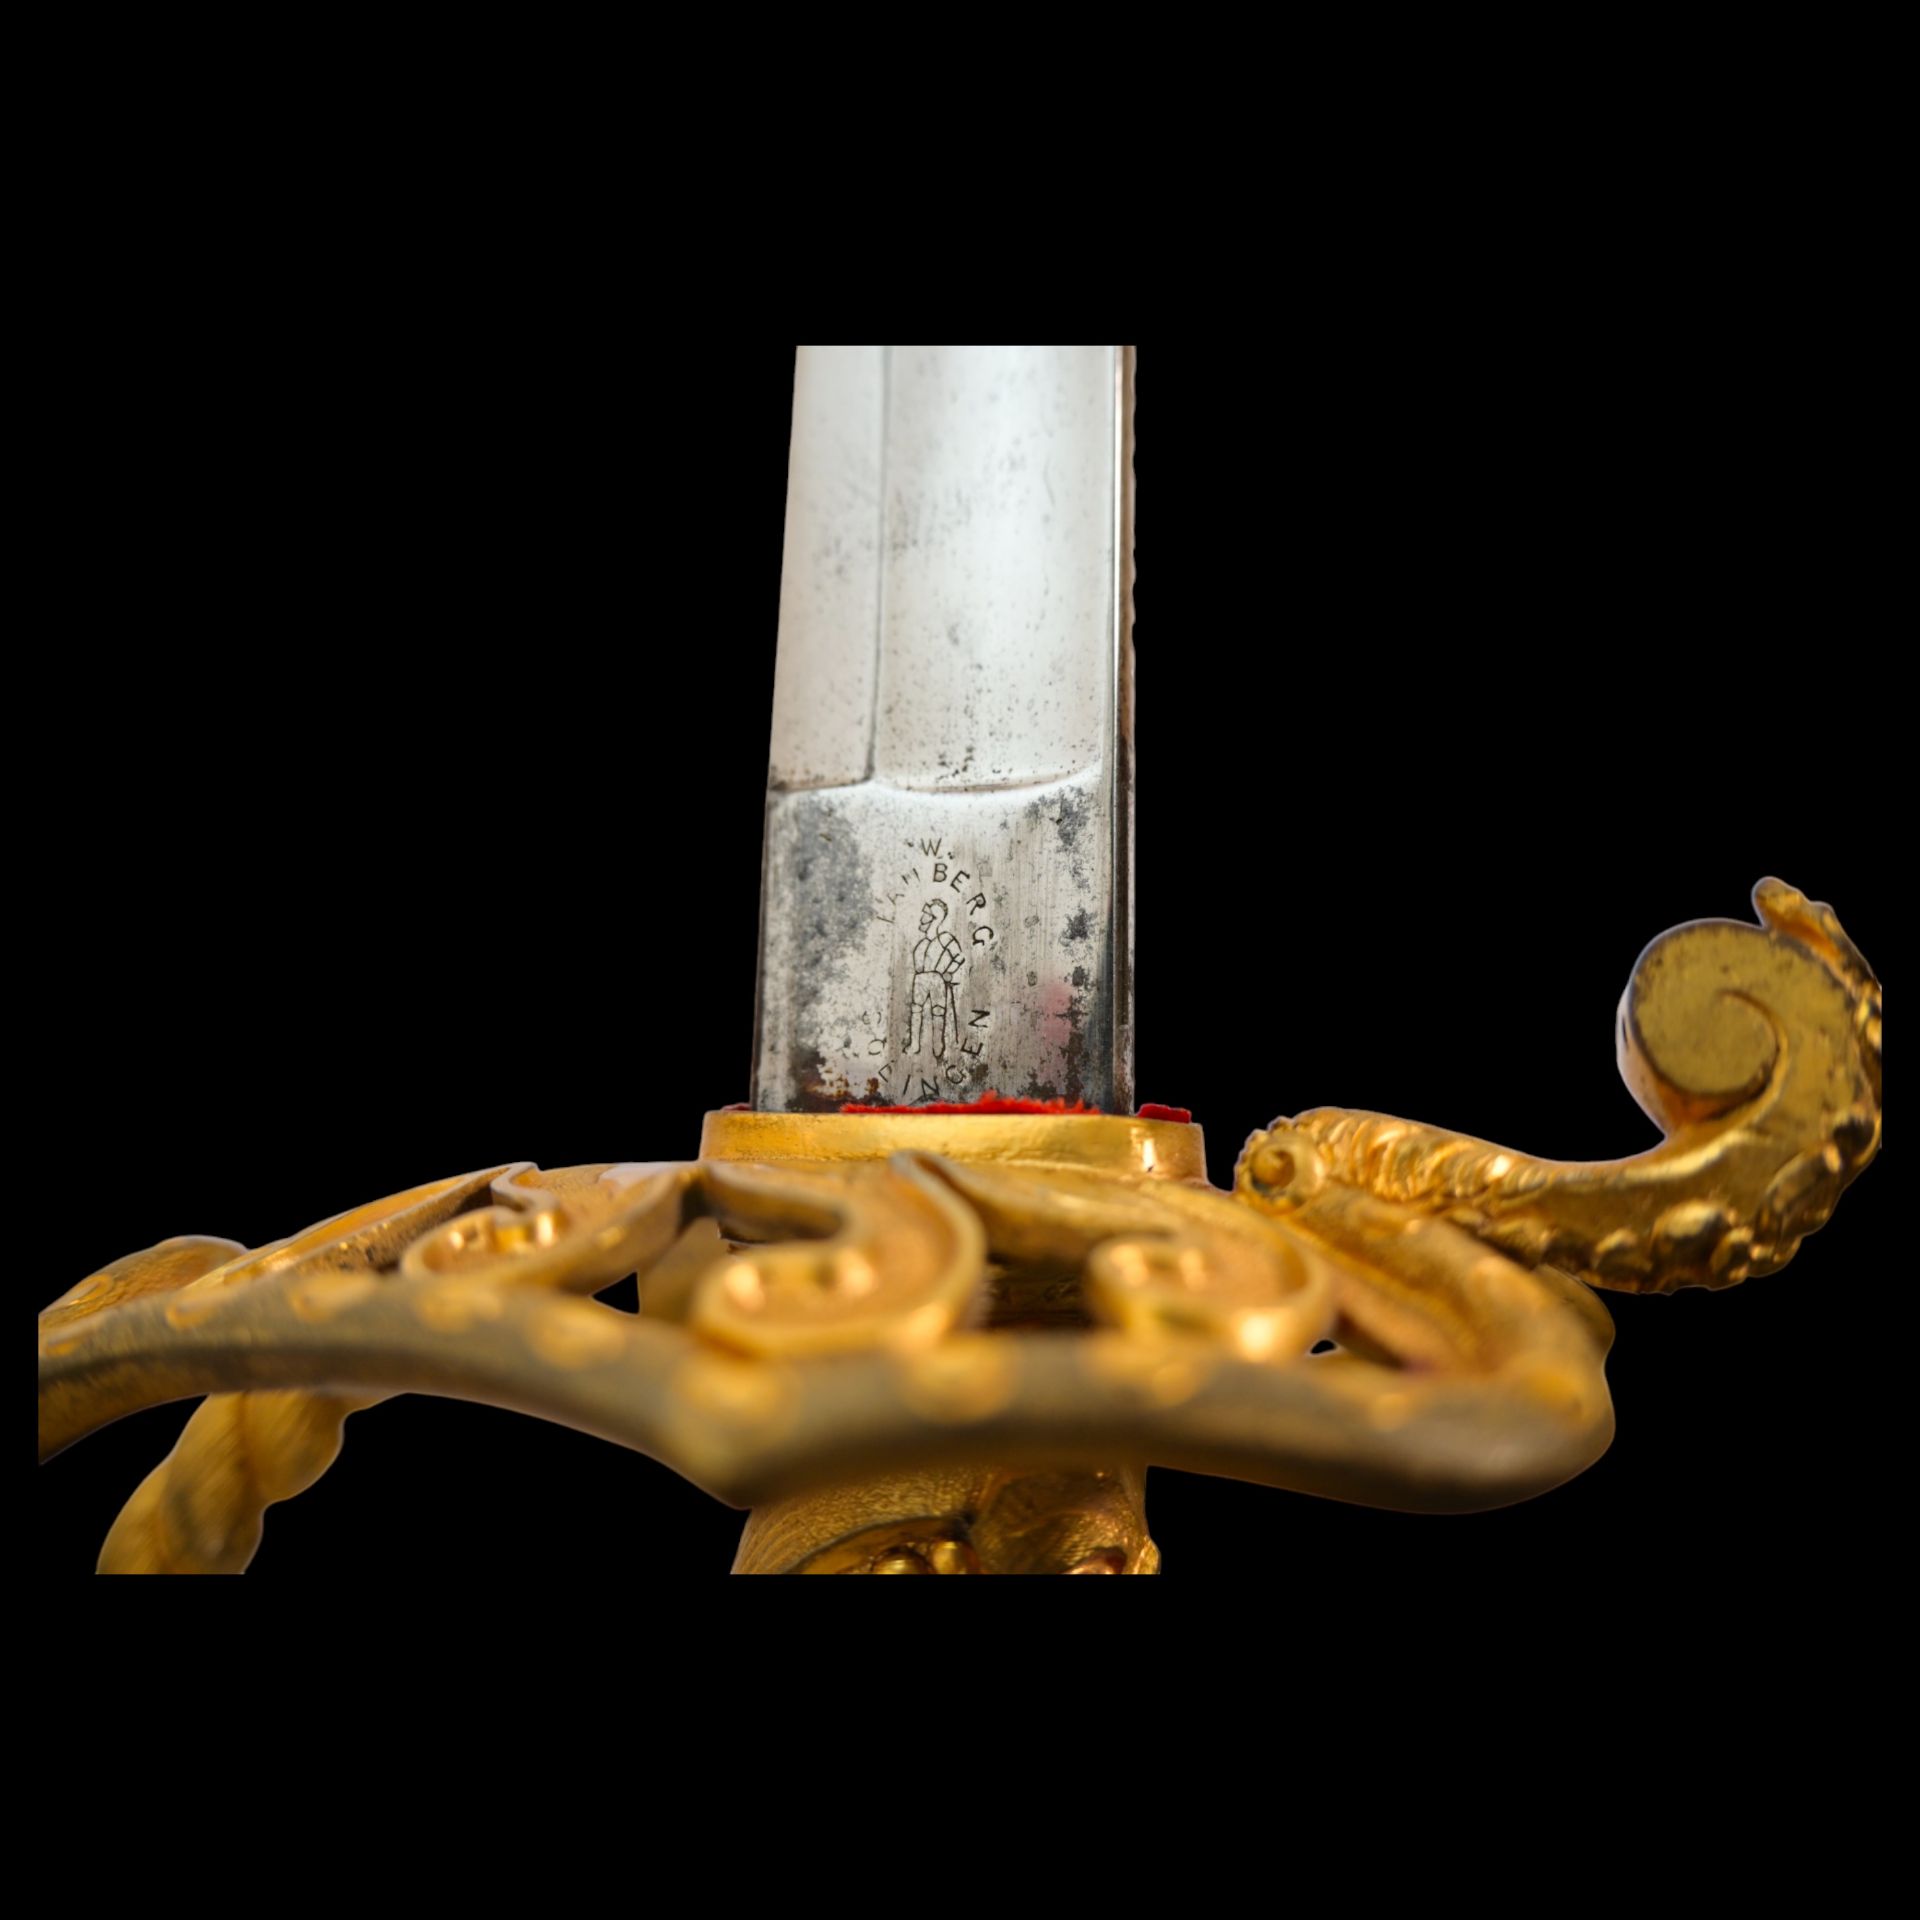 Magnificent "Schuyler Hartley & Graham" Indian Maiden Sword with Civil War Related Presentation. - Image 10 of 20